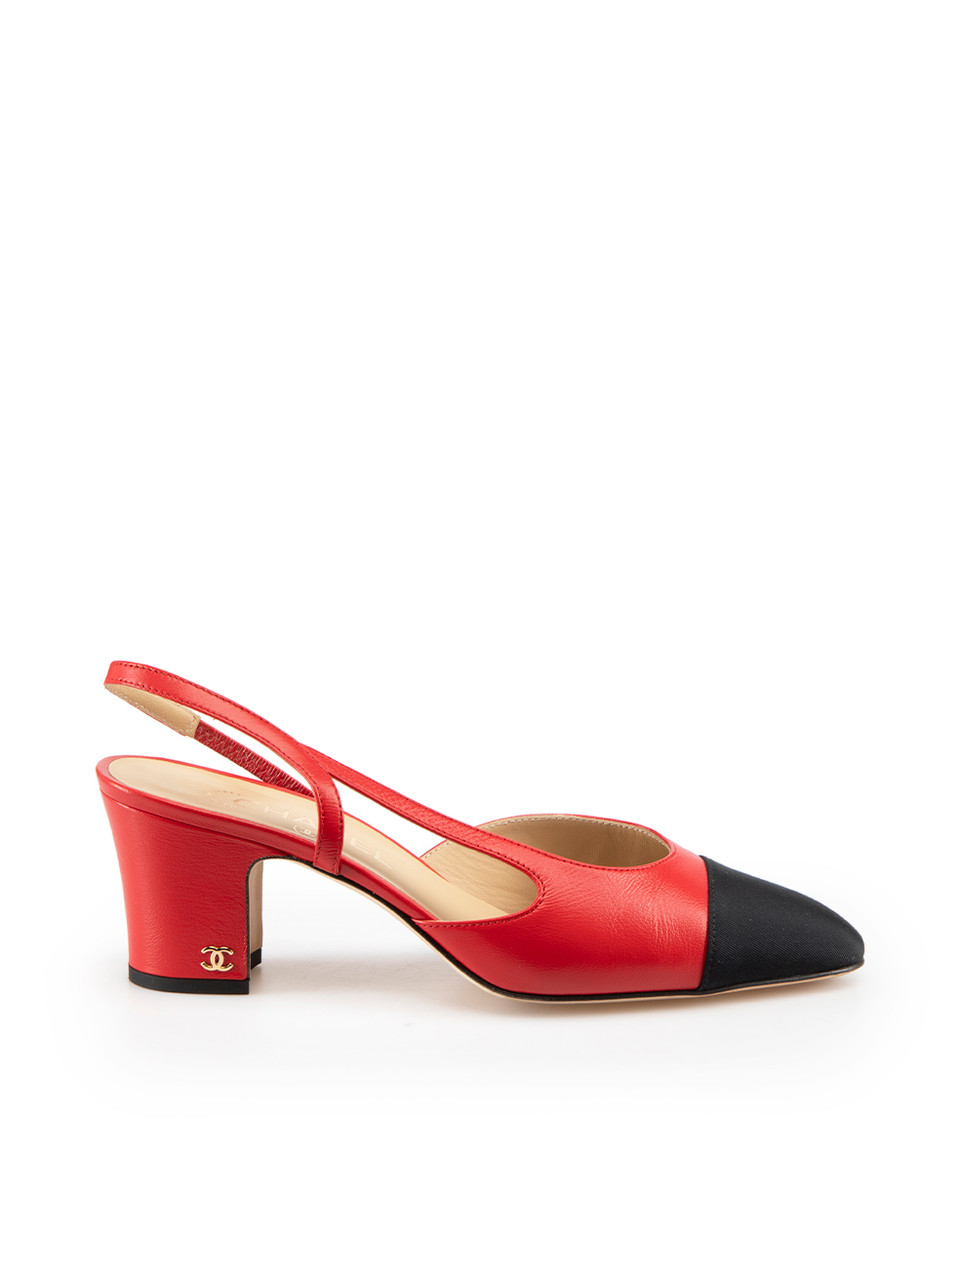 Chanel Red Leather Black Cap-Toe Ballet Flats Size 10.5/41